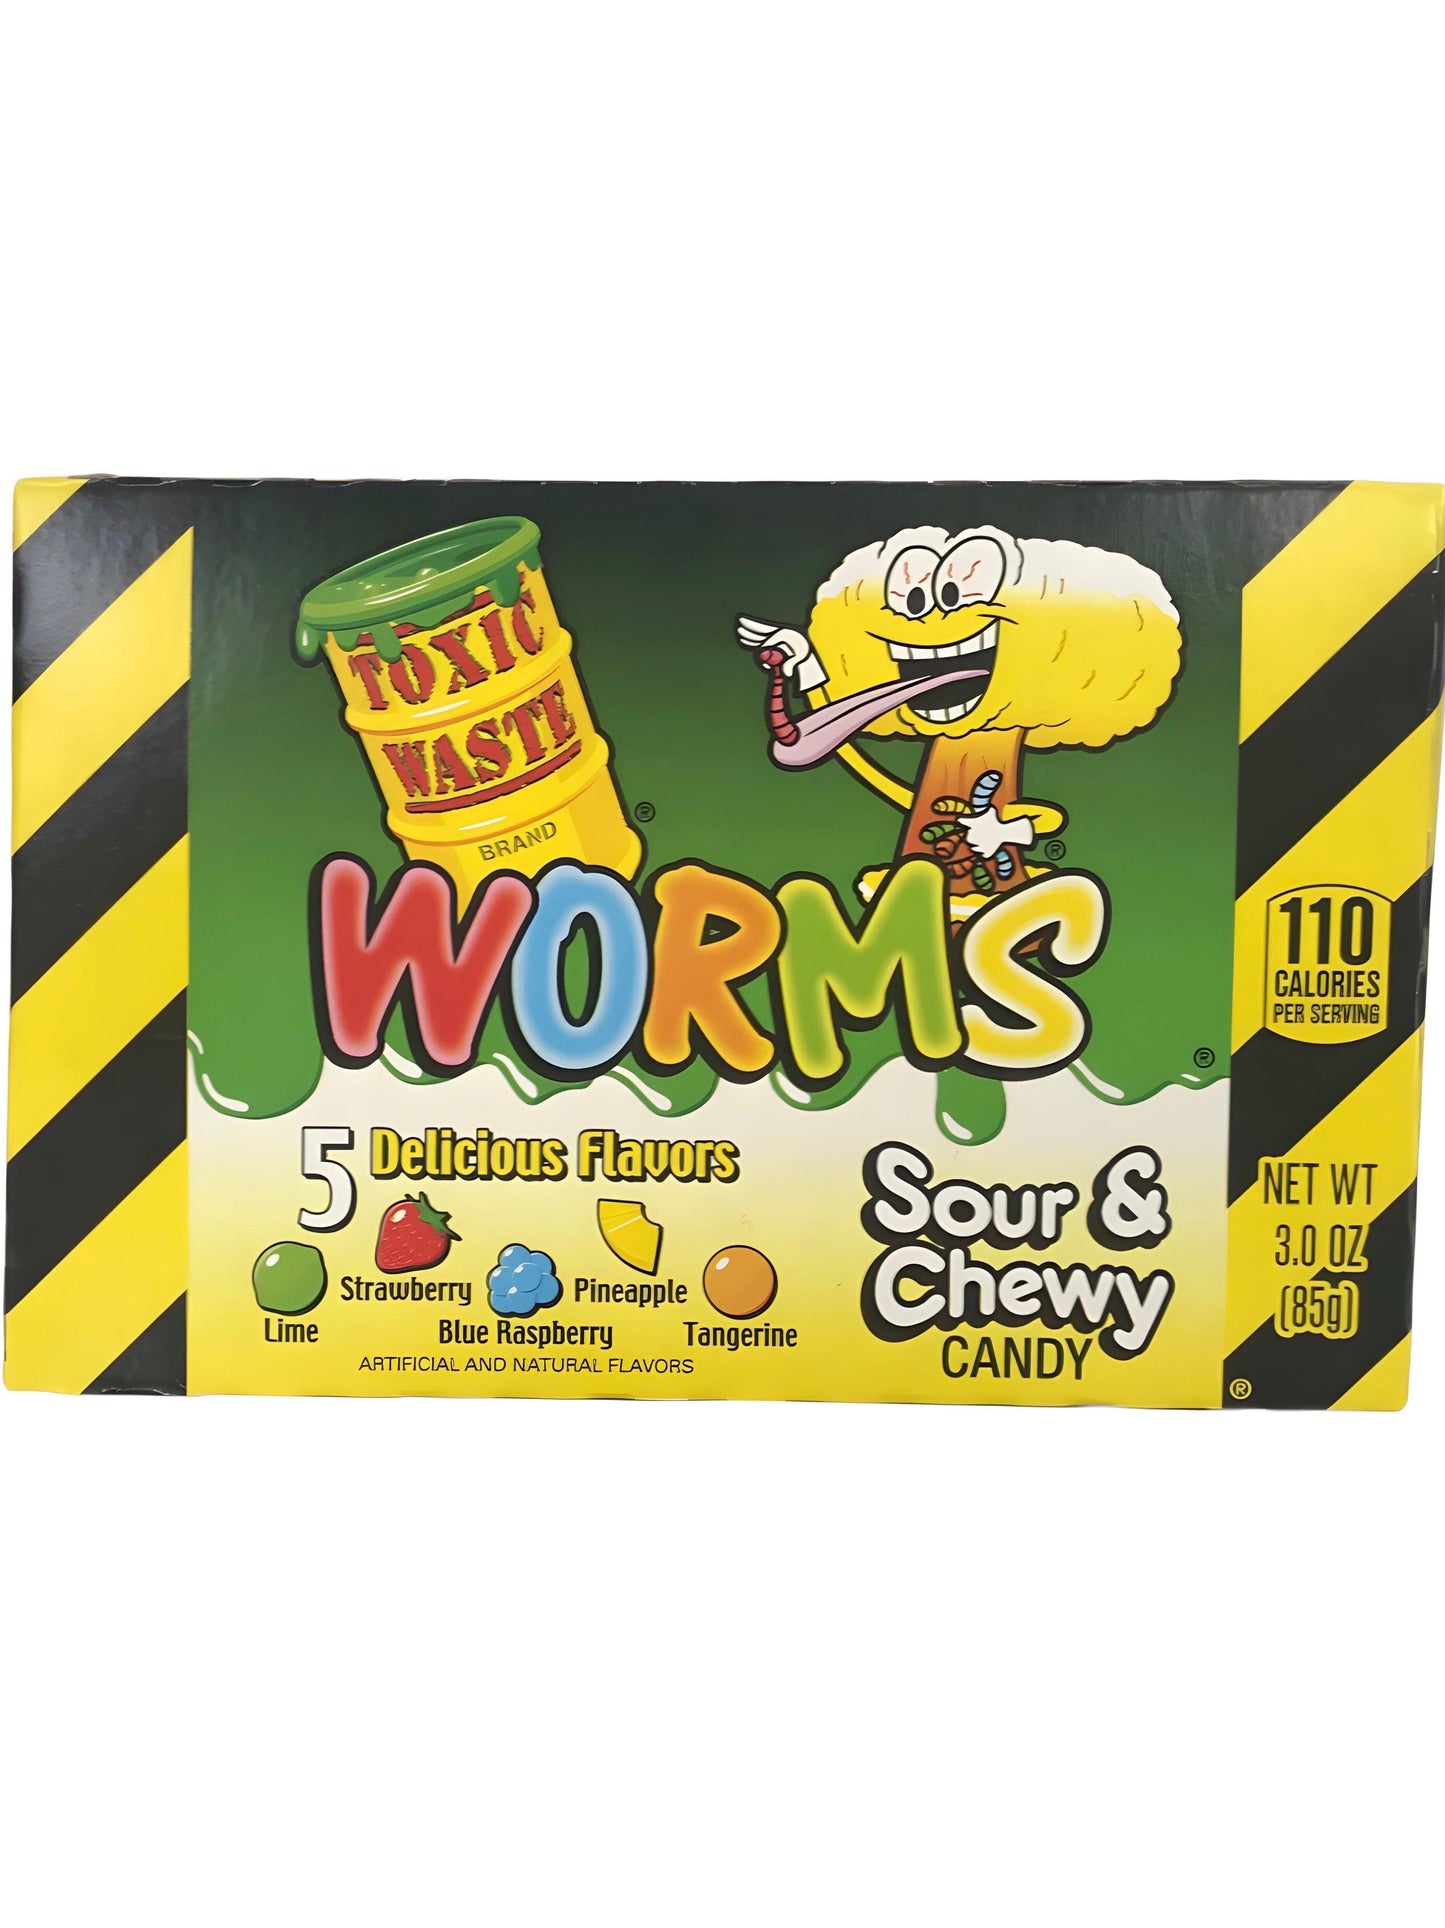 Toxic Waste Worms Sour & Chewy Candy Theatre Box 3OZ - BB 02/24 - Extreme Snacks